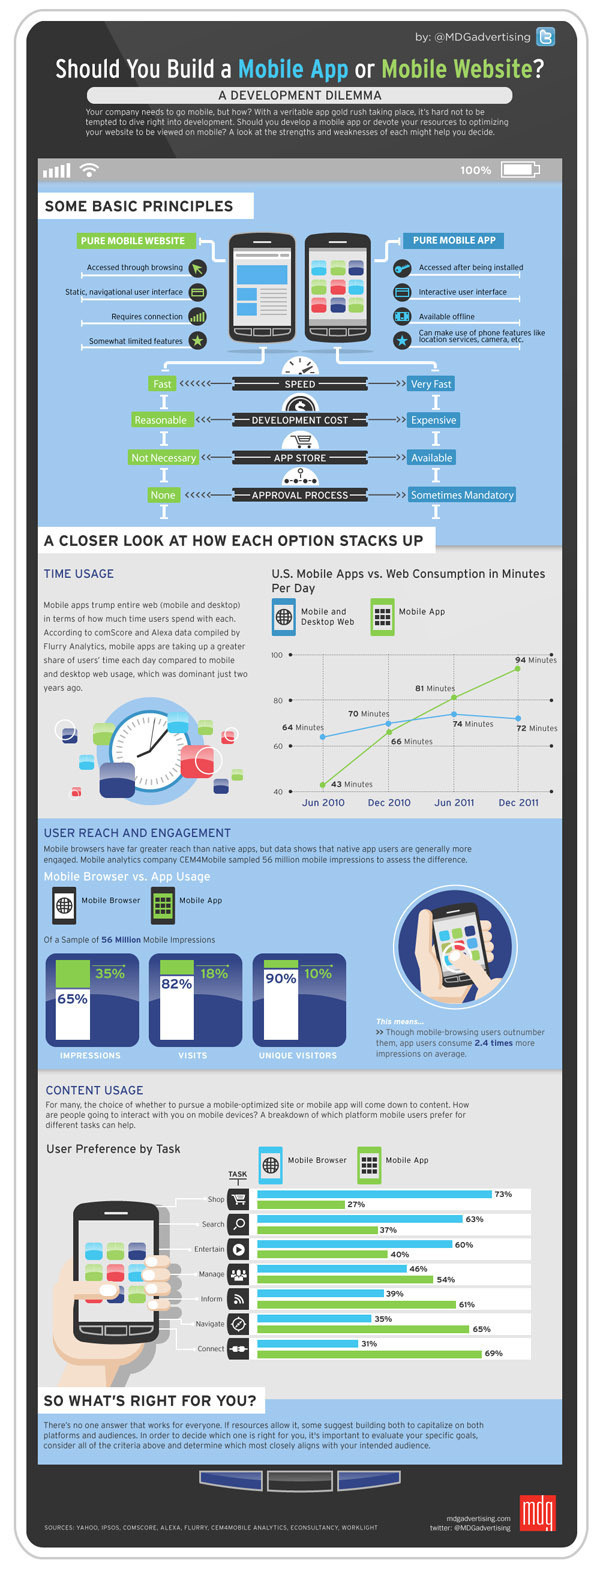 Should You Build a Mobile App or Mobile Website? [Infographic] #infographic